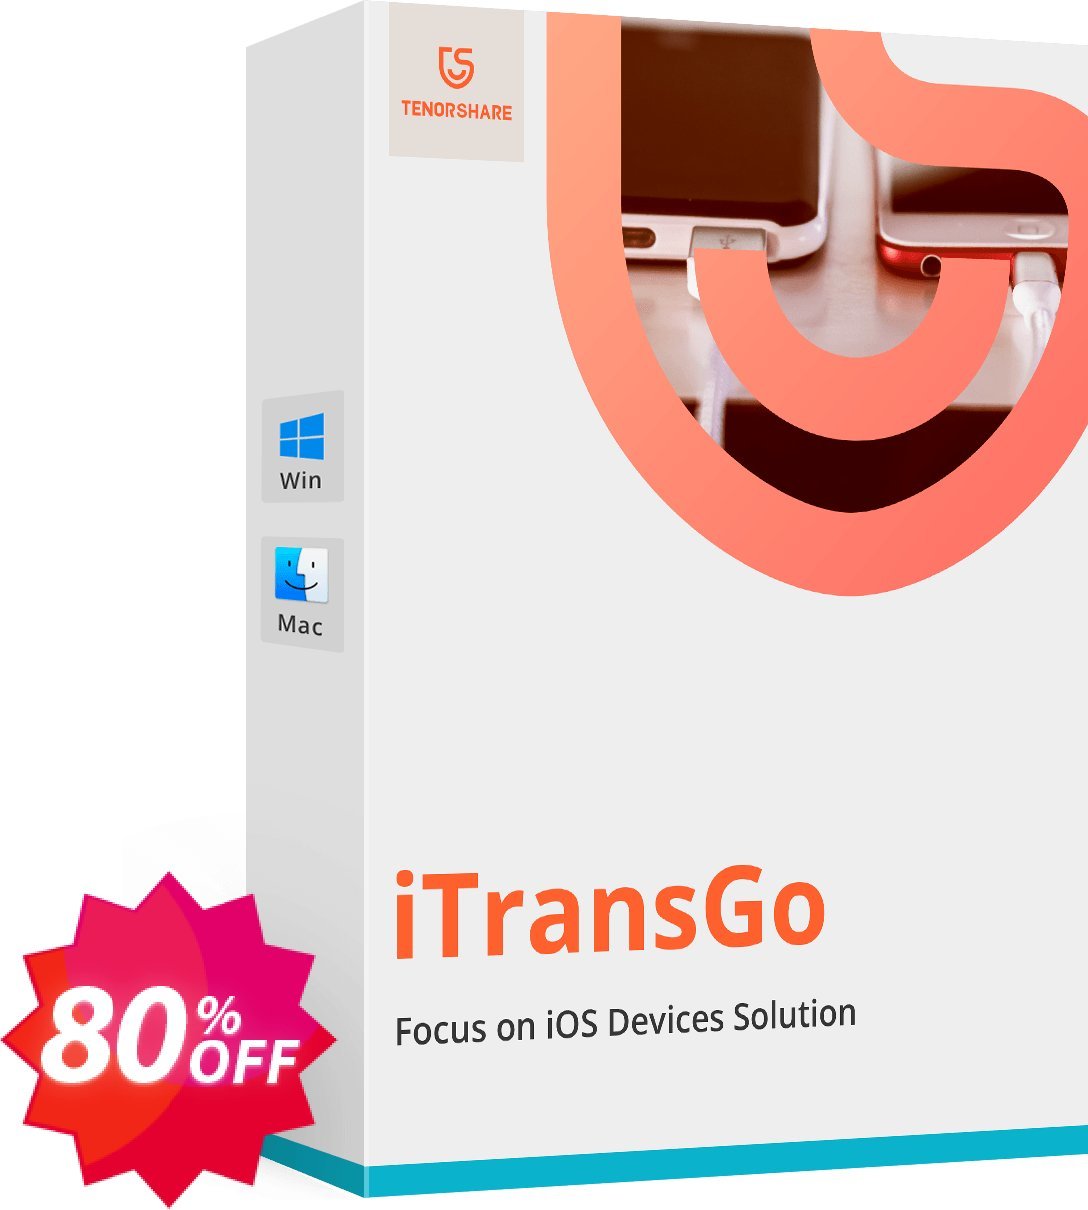 Tenorshare iTransGo, 6-10 Devices  Coupon code 80% discount 